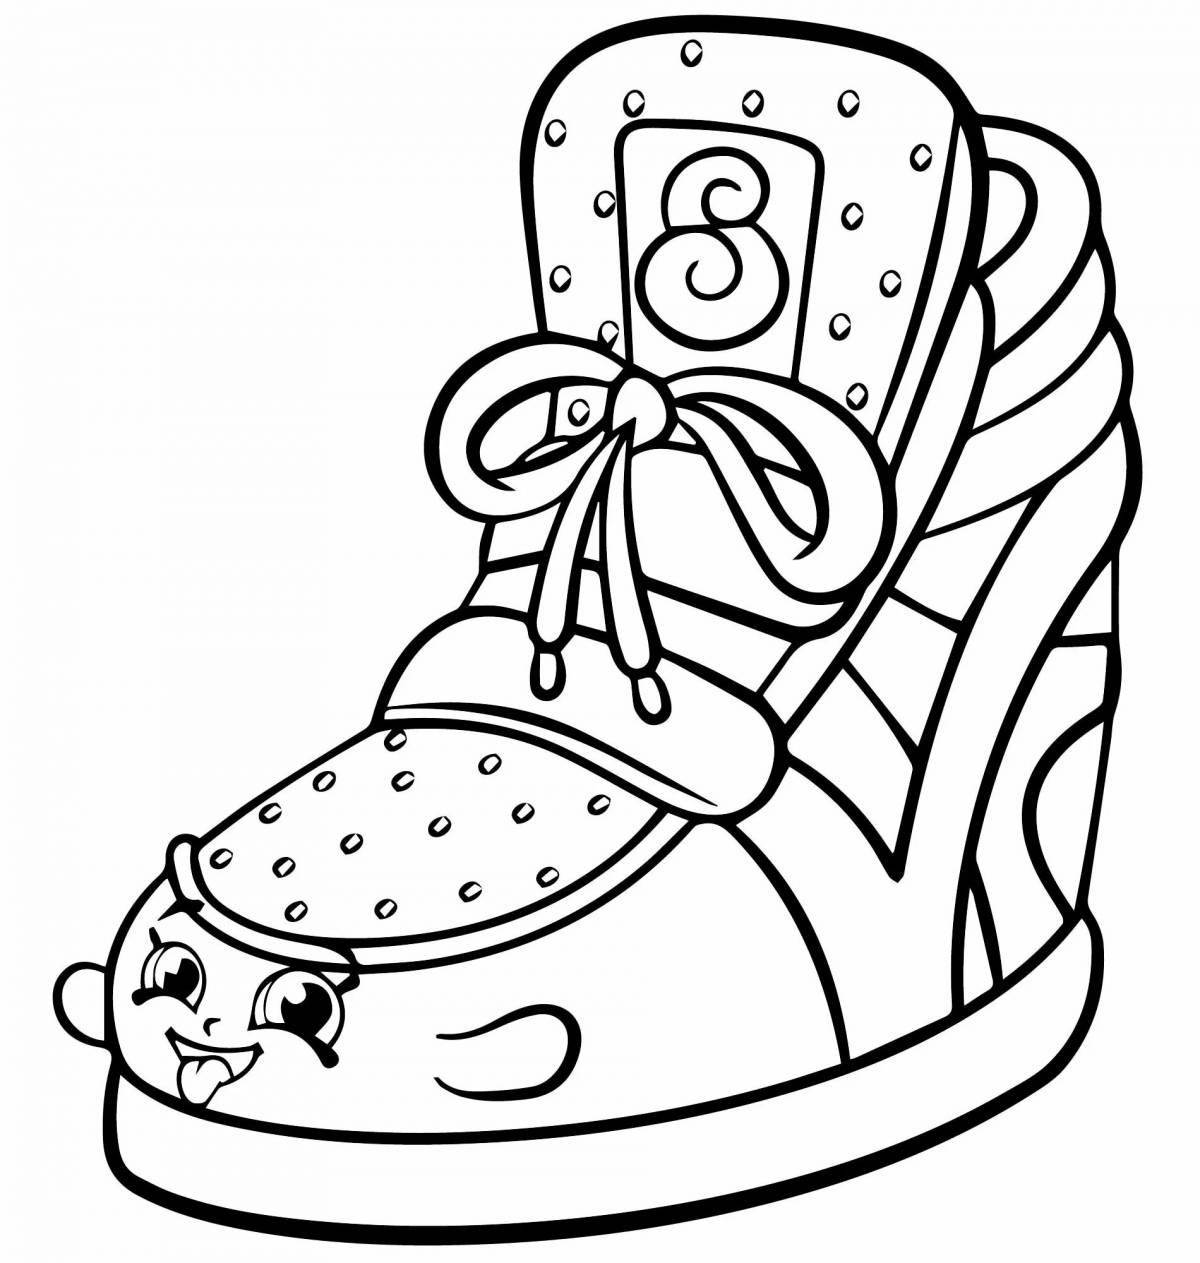 Exciting toddler shoes coloring page